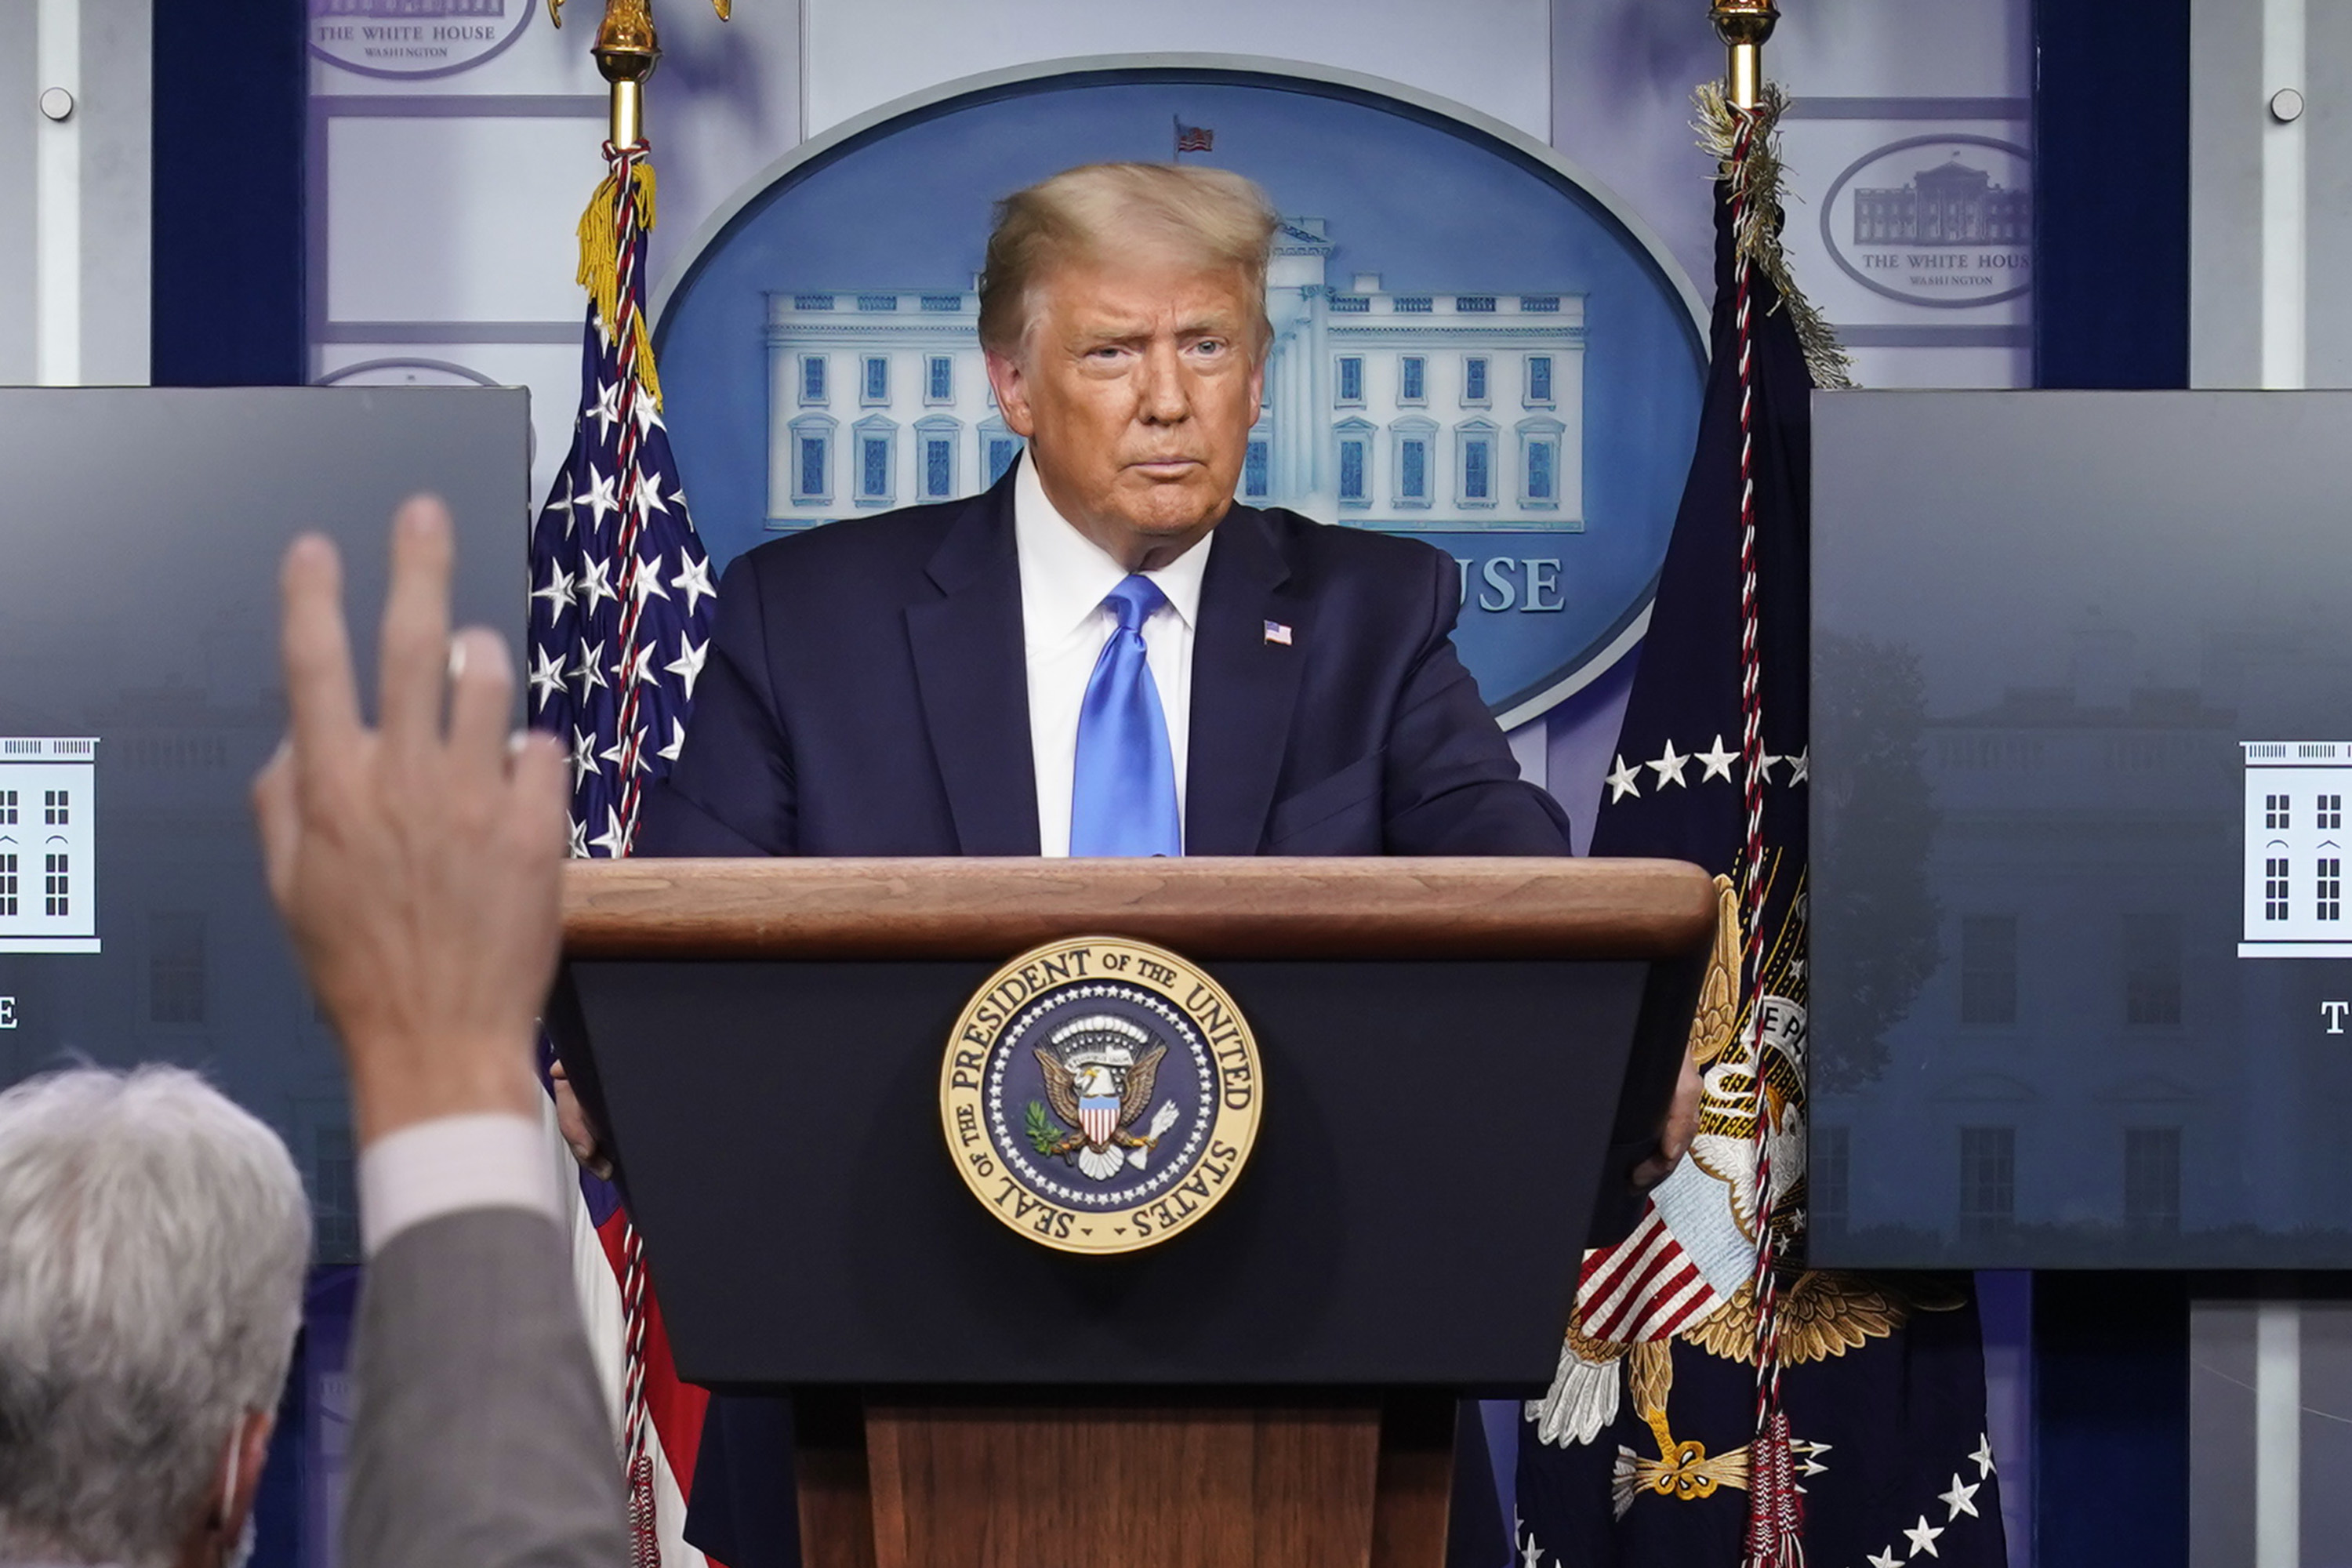 President Donald Trump speaks during a news conference in the briefing room of the White House on September 23, in Washington, DC.